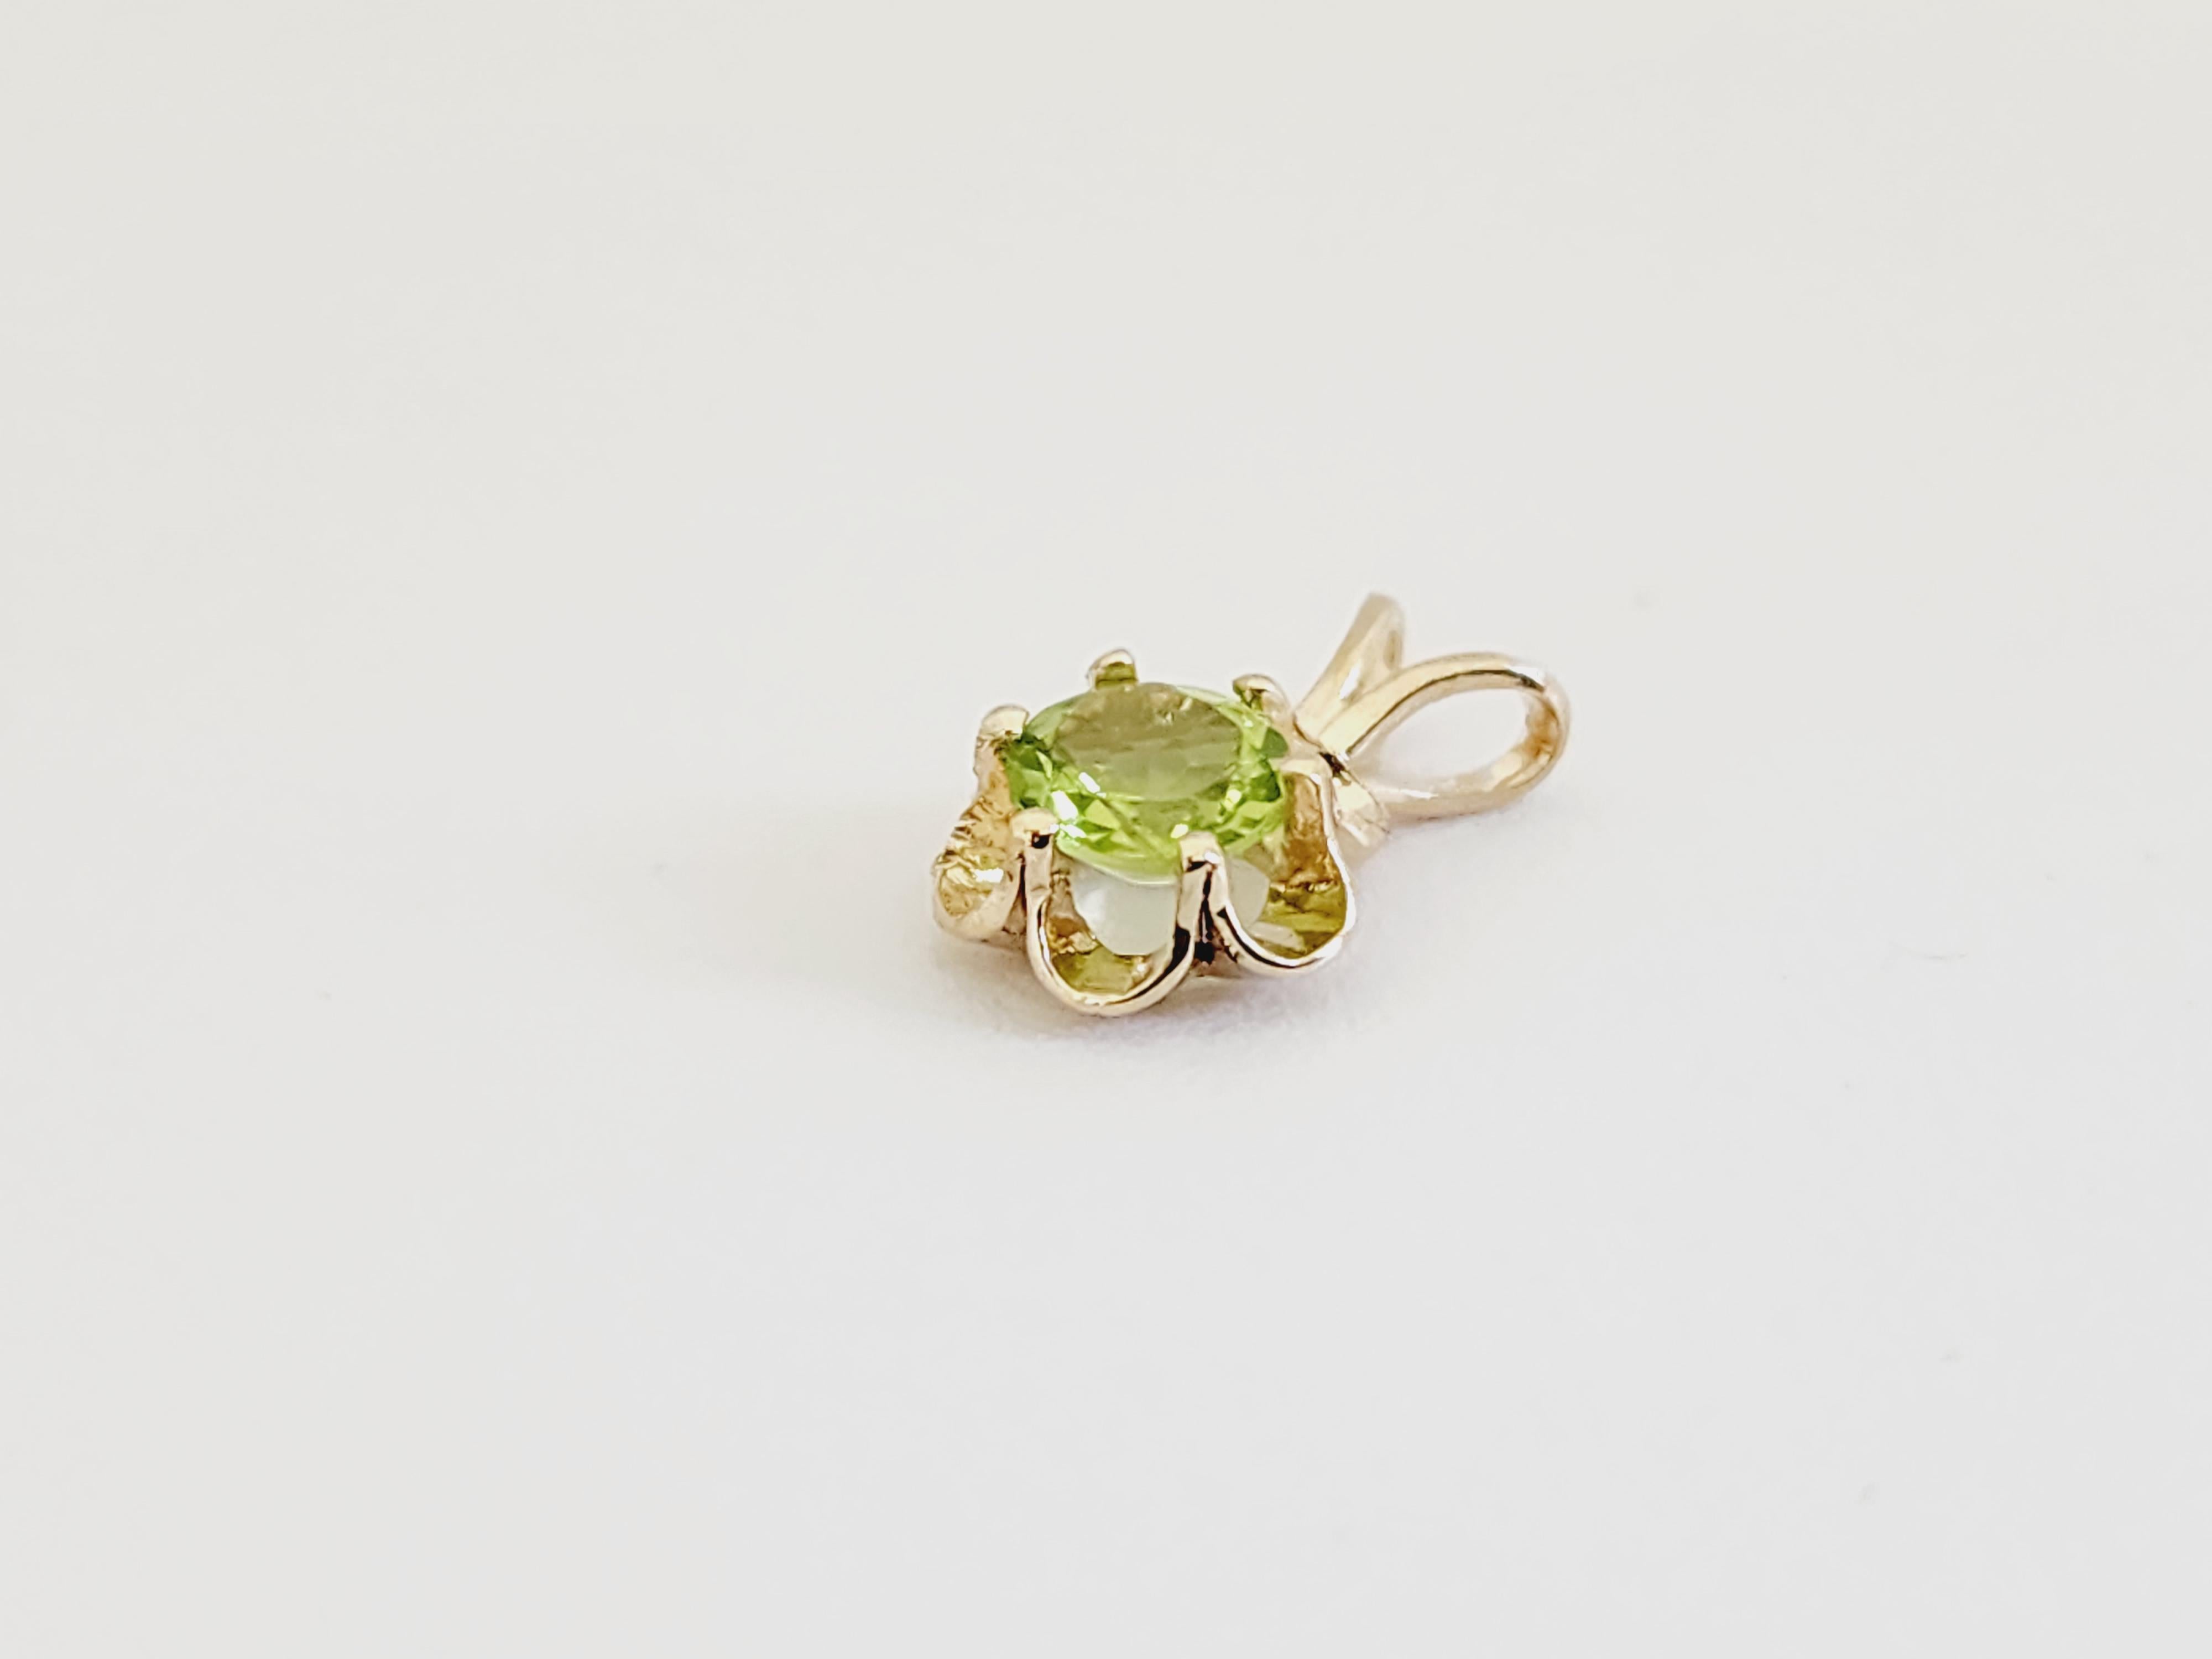 0.45 Carat Round Peridot Pendant 14 Karat Yellow Gold In New Condition For Sale In Great Neck, NY